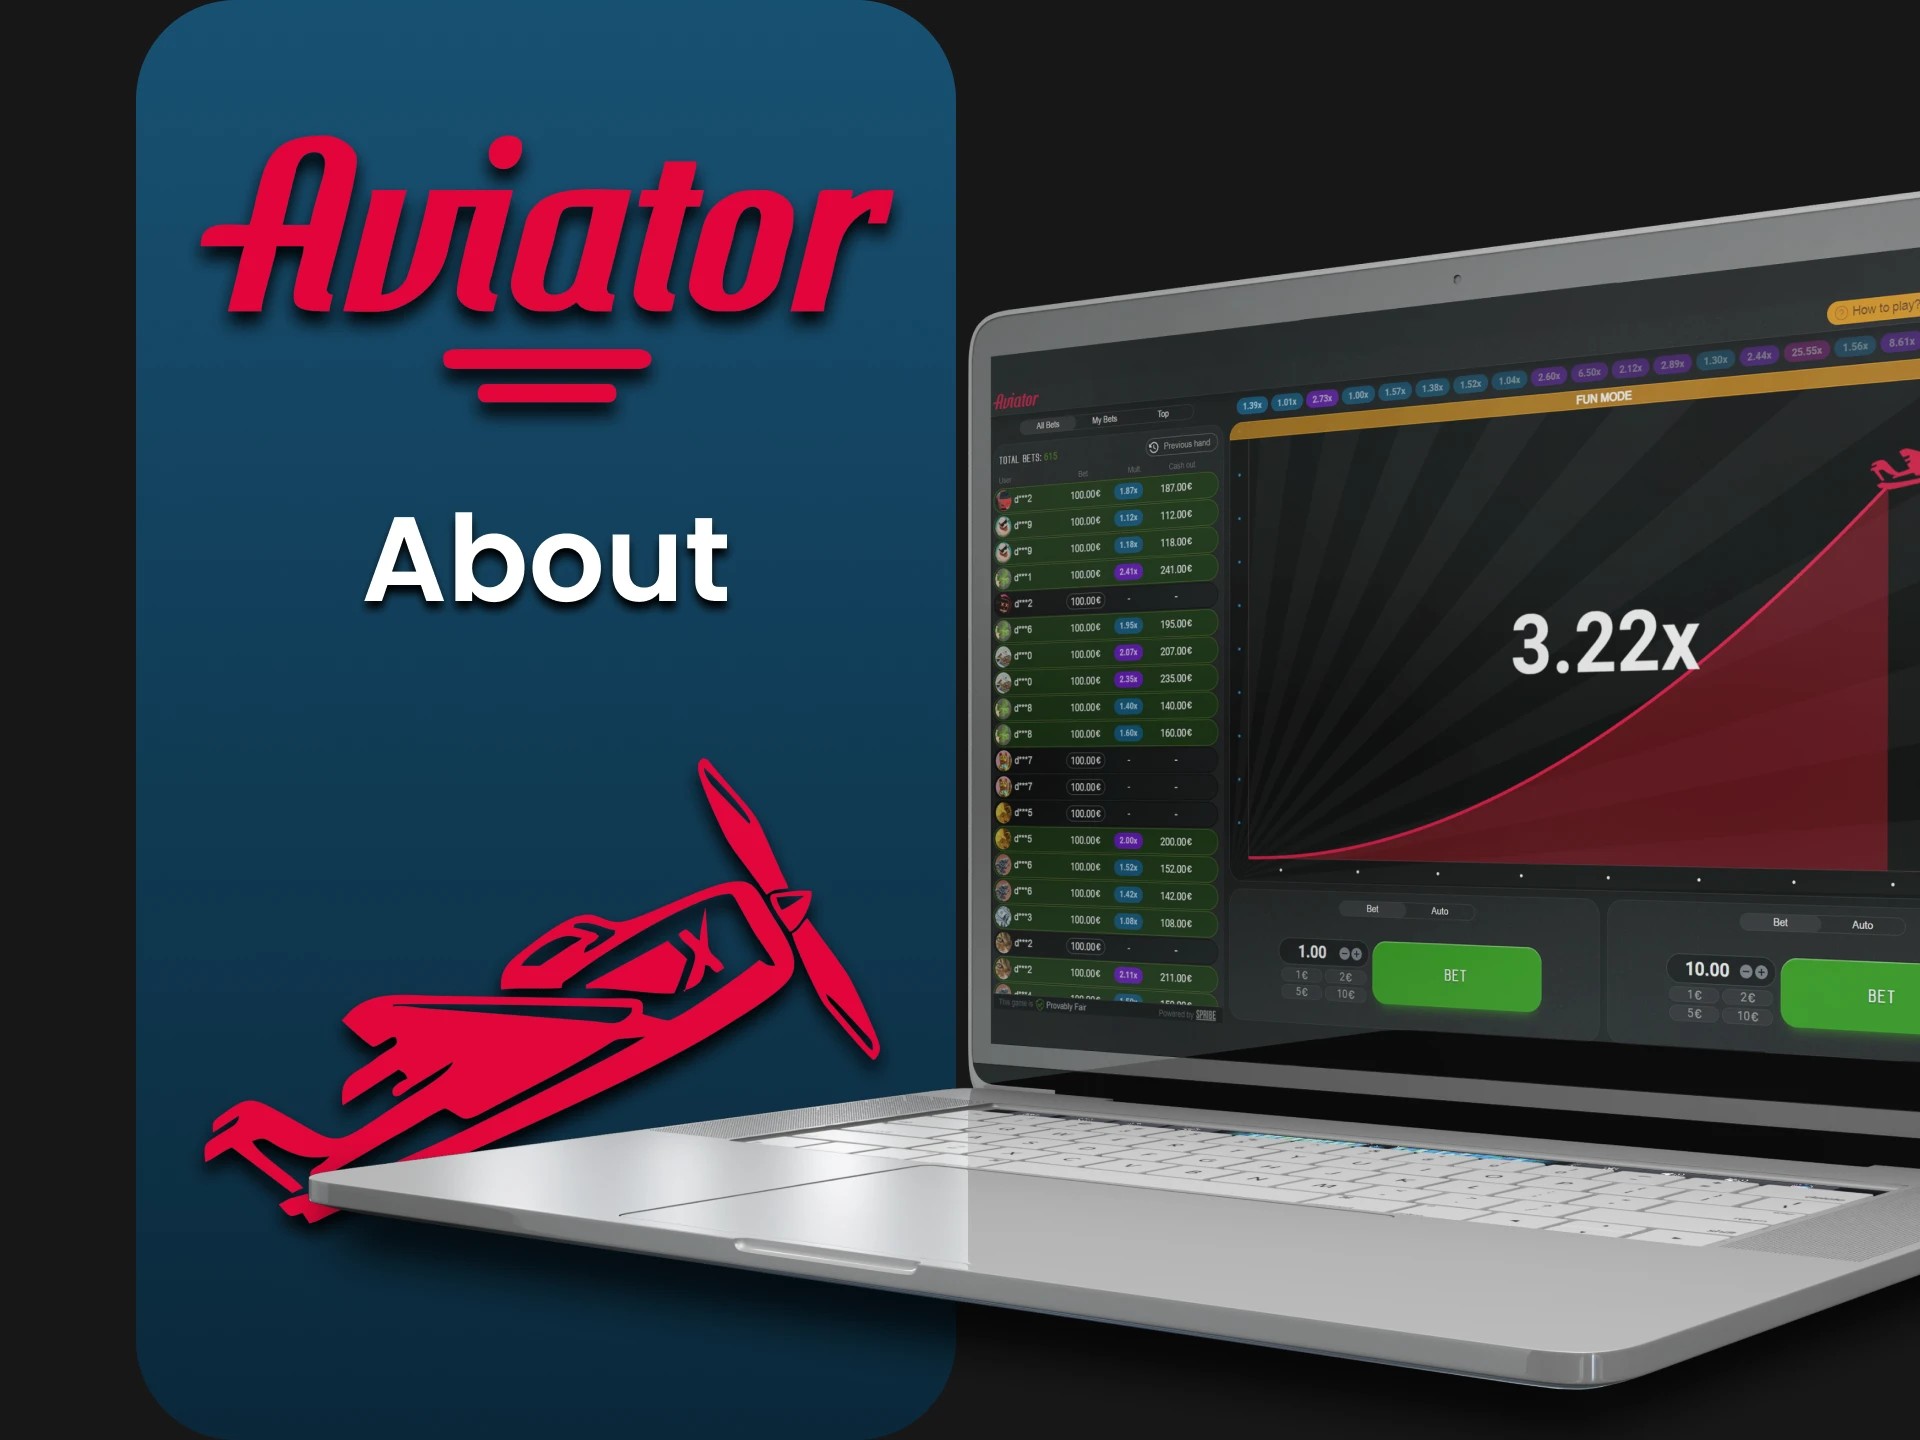 We will tell you everything about the game Aviator.